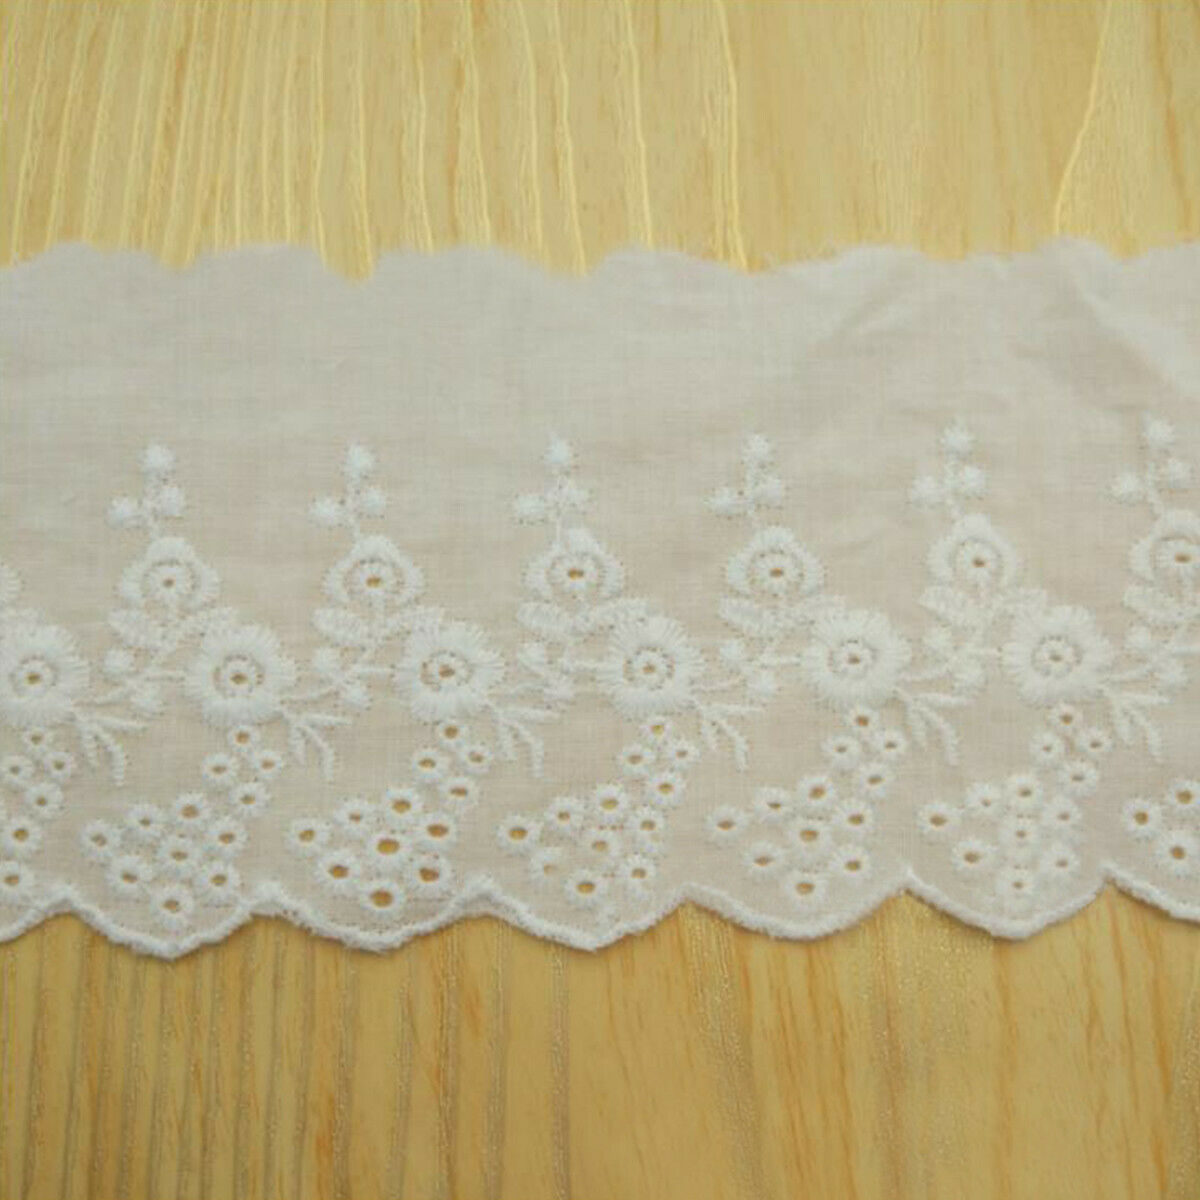 1Yd Embroidery Trim Floral Cotton Lace Ribbon Wedding Fabric Clothing DIY Sewing